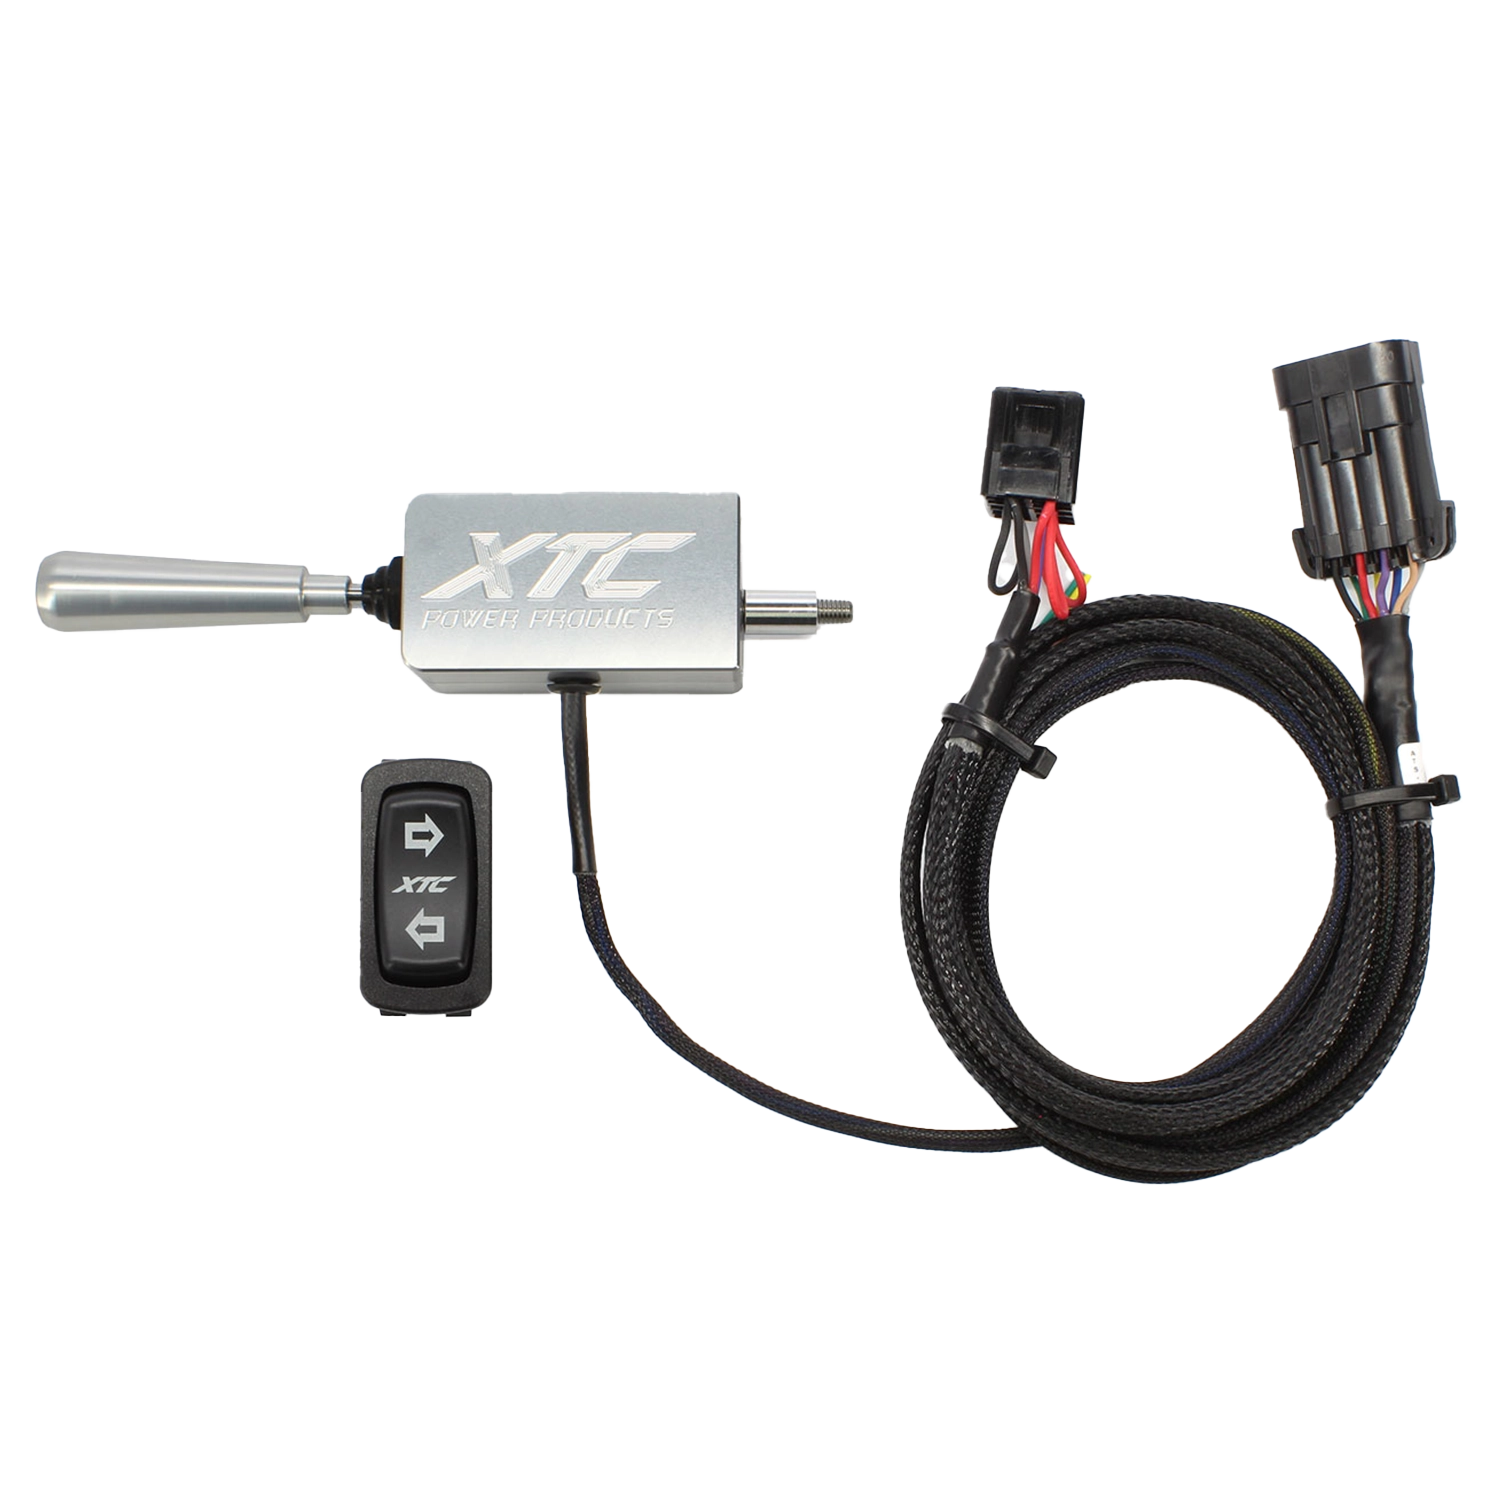 xtc power products polaris ranger 19 xp 1000 self canceling turn signal system with billet lever 0